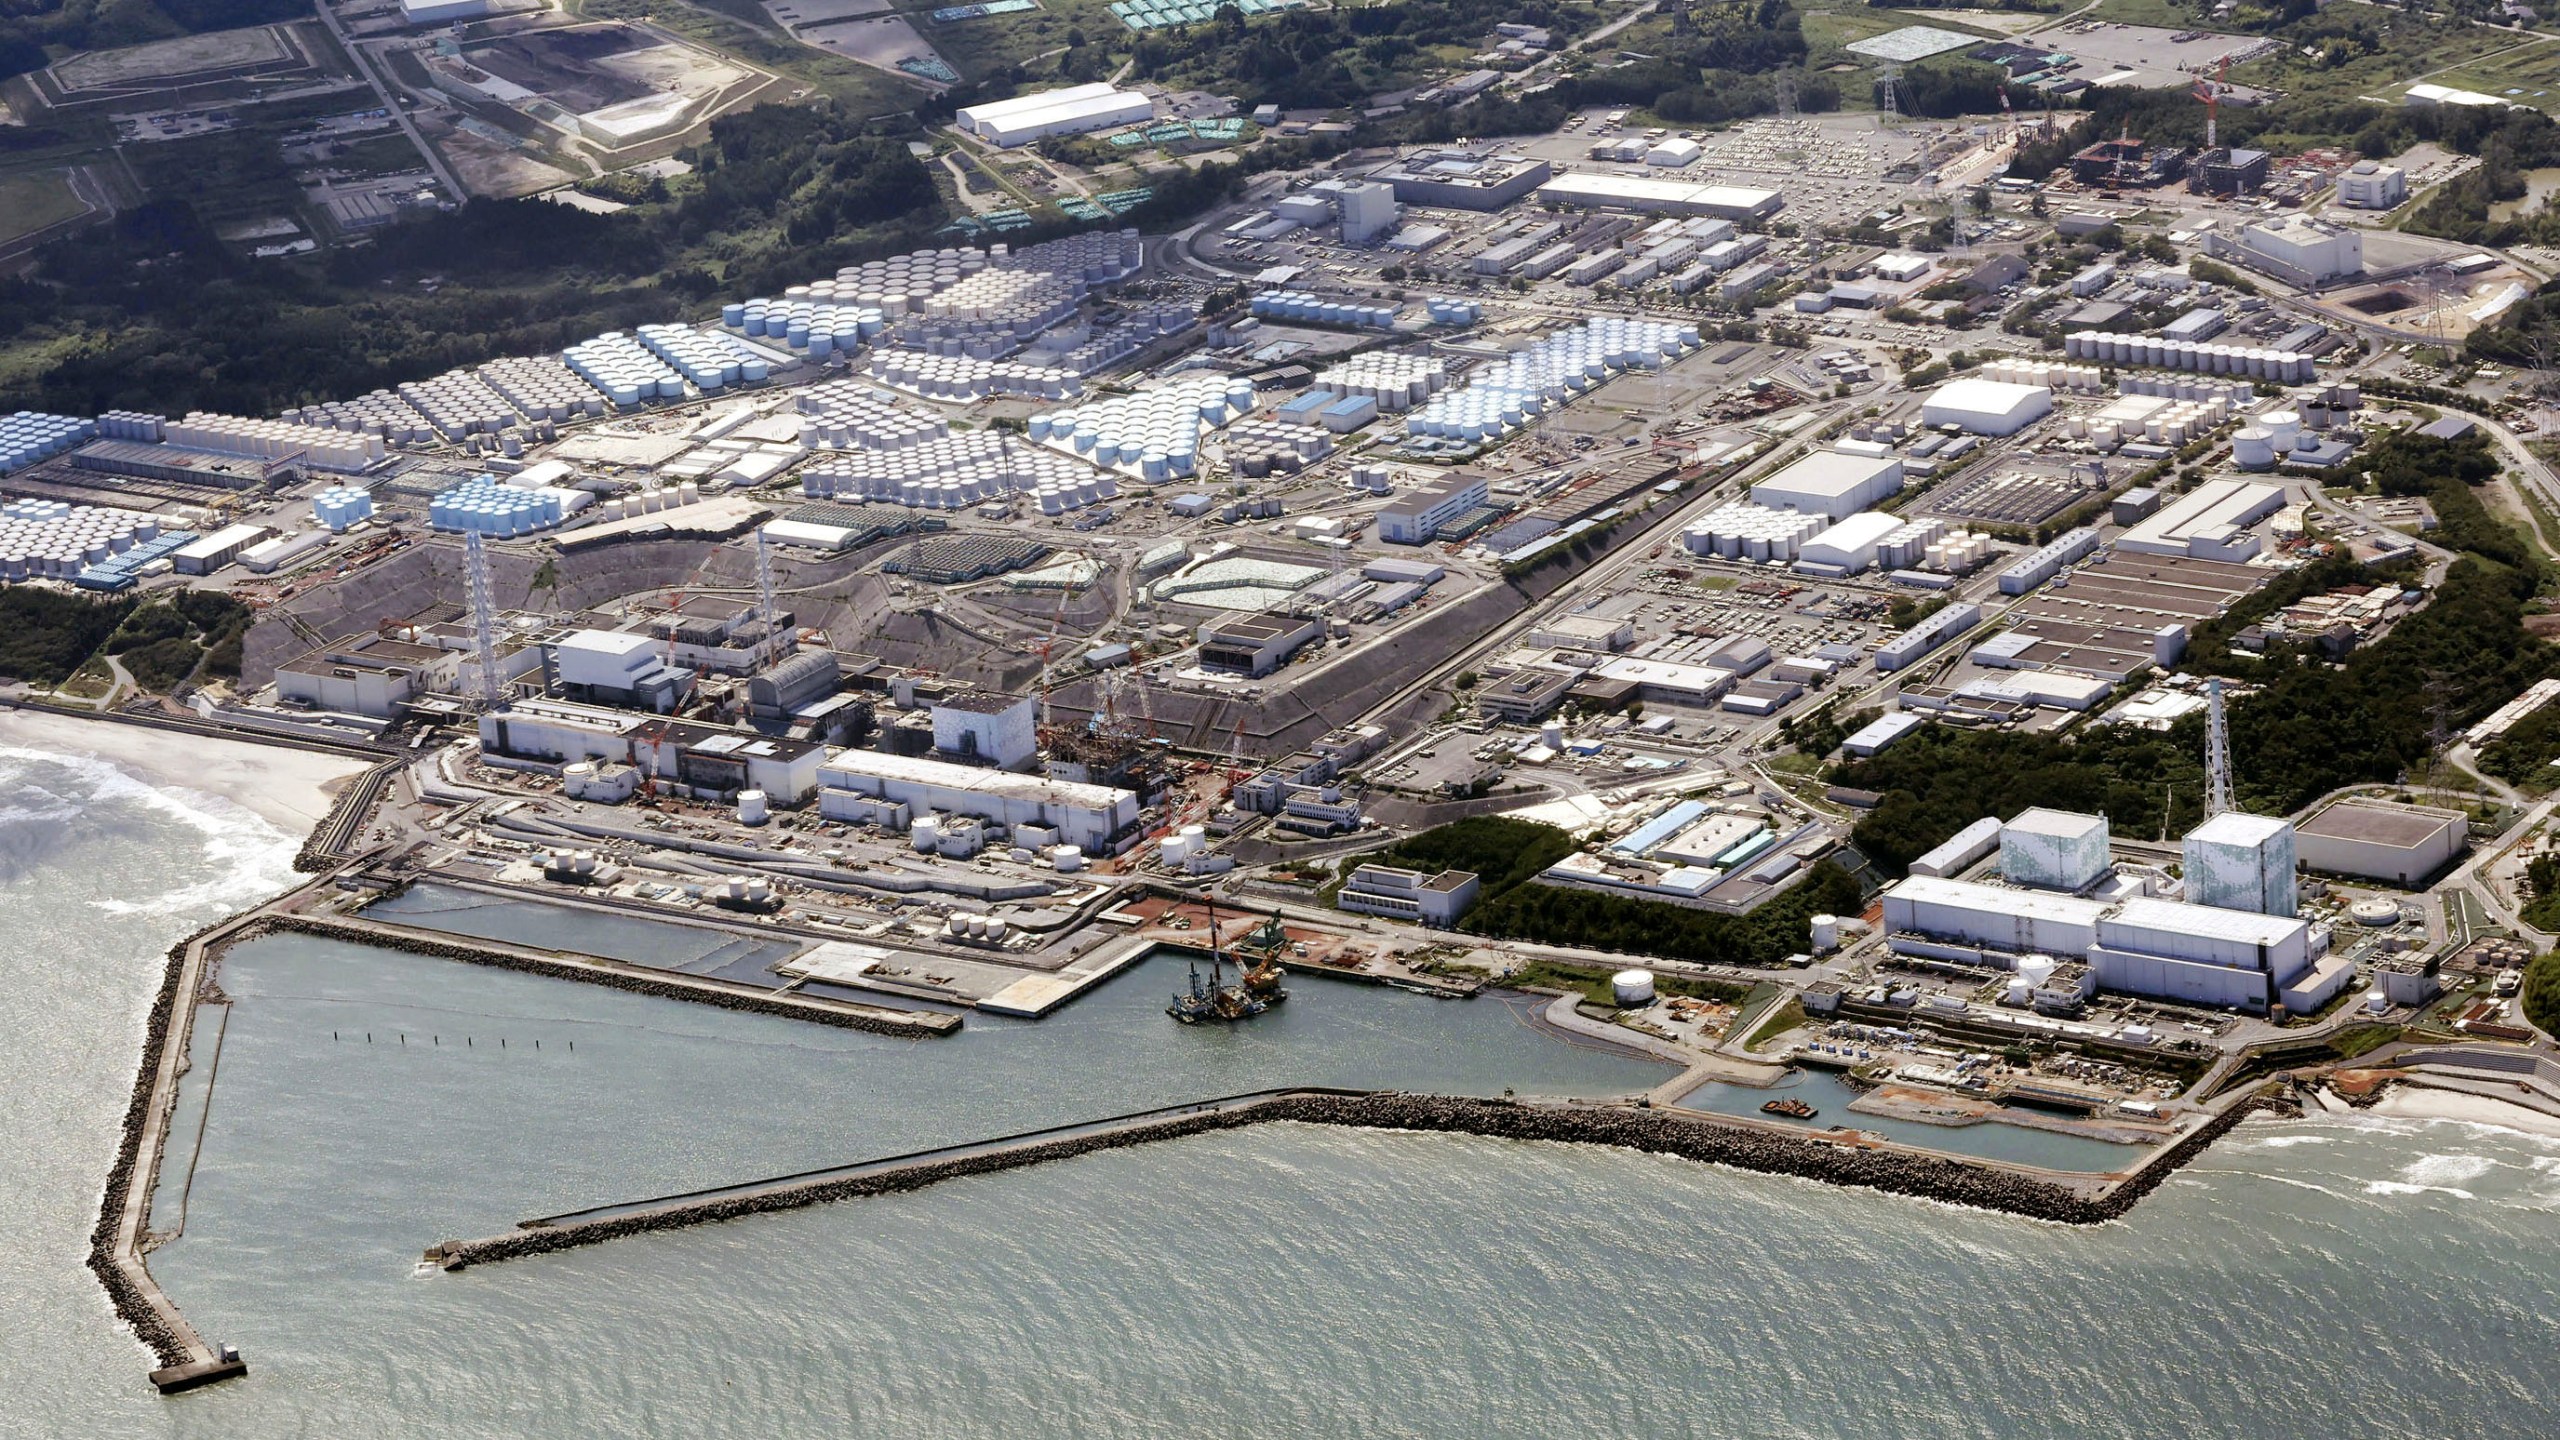 FILE - This aerial view shows the Fukushima Daiichi nuclear power plant in Fukushima, northern Japan, on Aug. 24, 2023, shortly after its operator Tokyo Electric Power Company Holdings TEPCO began releasing its first batch of treated radioactive water into the Pacific Ocean. Japan on Monday, March 11, 2024, marked 13 years since a massive earthquake and tsunami hit the country’s northern coasts. (Kyodo News via AP, File)